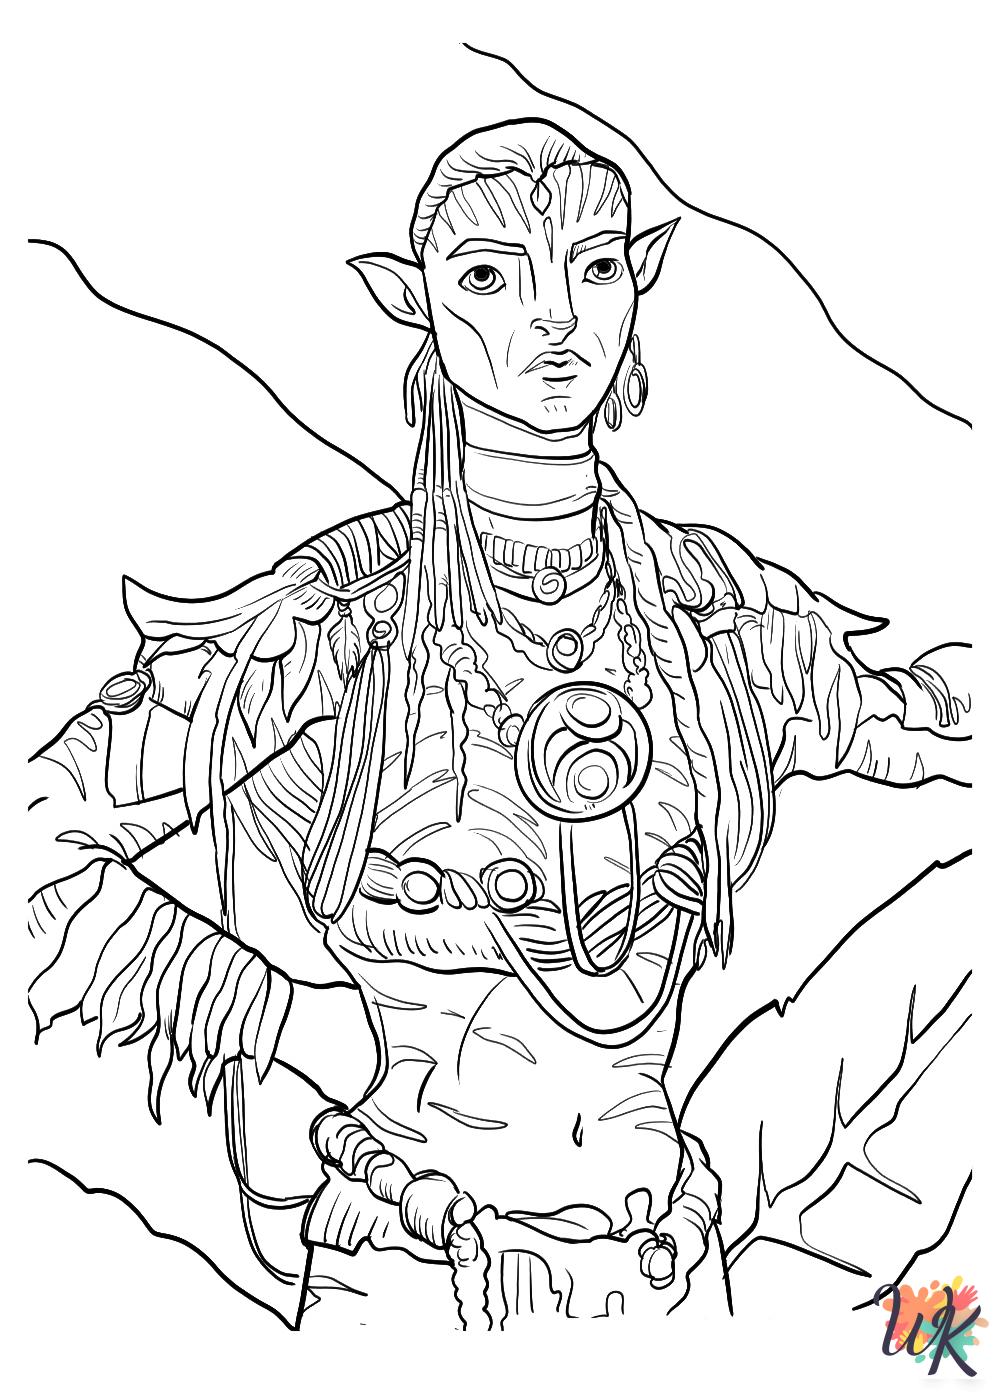 merry Avatar coloring pages